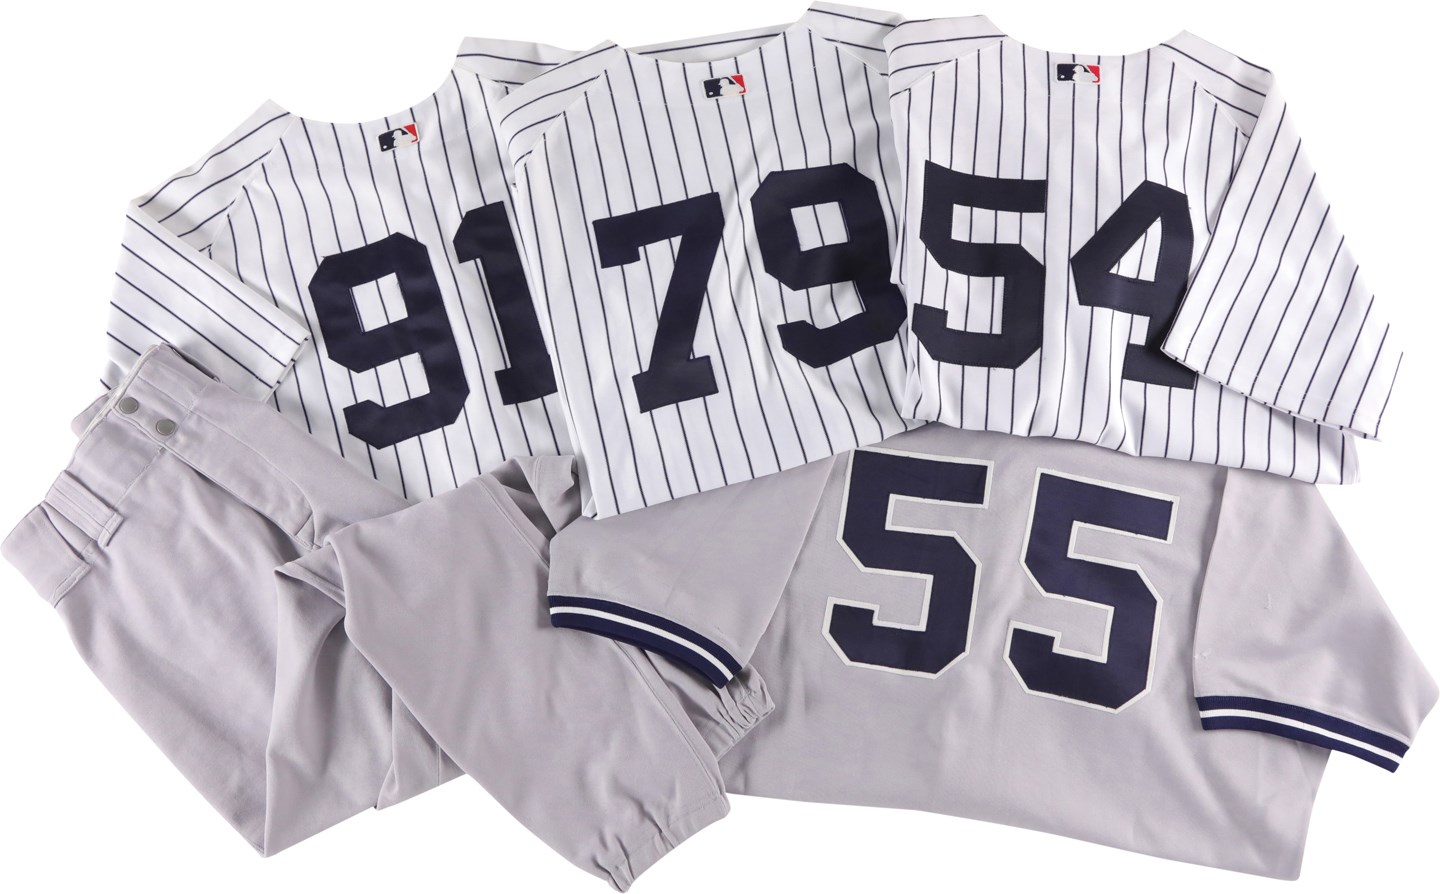 1993-2004 New York Yankees Game Worn & Issued Jersey Collection - Most Steiner Certified (9)